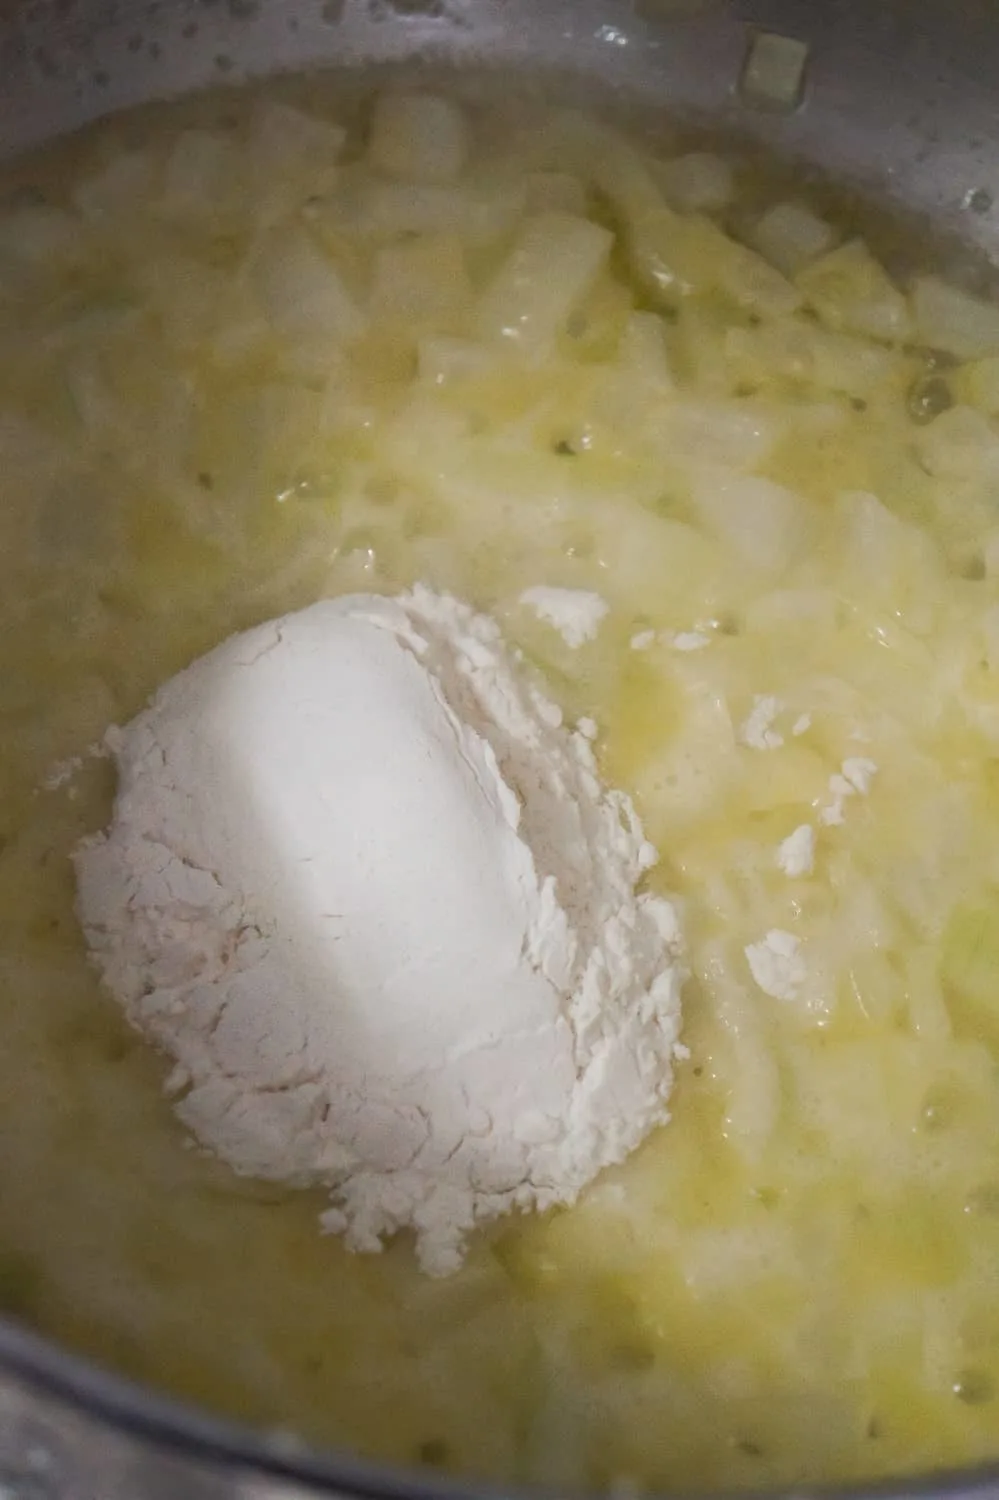 flour added to diced onions and butter in soup pot